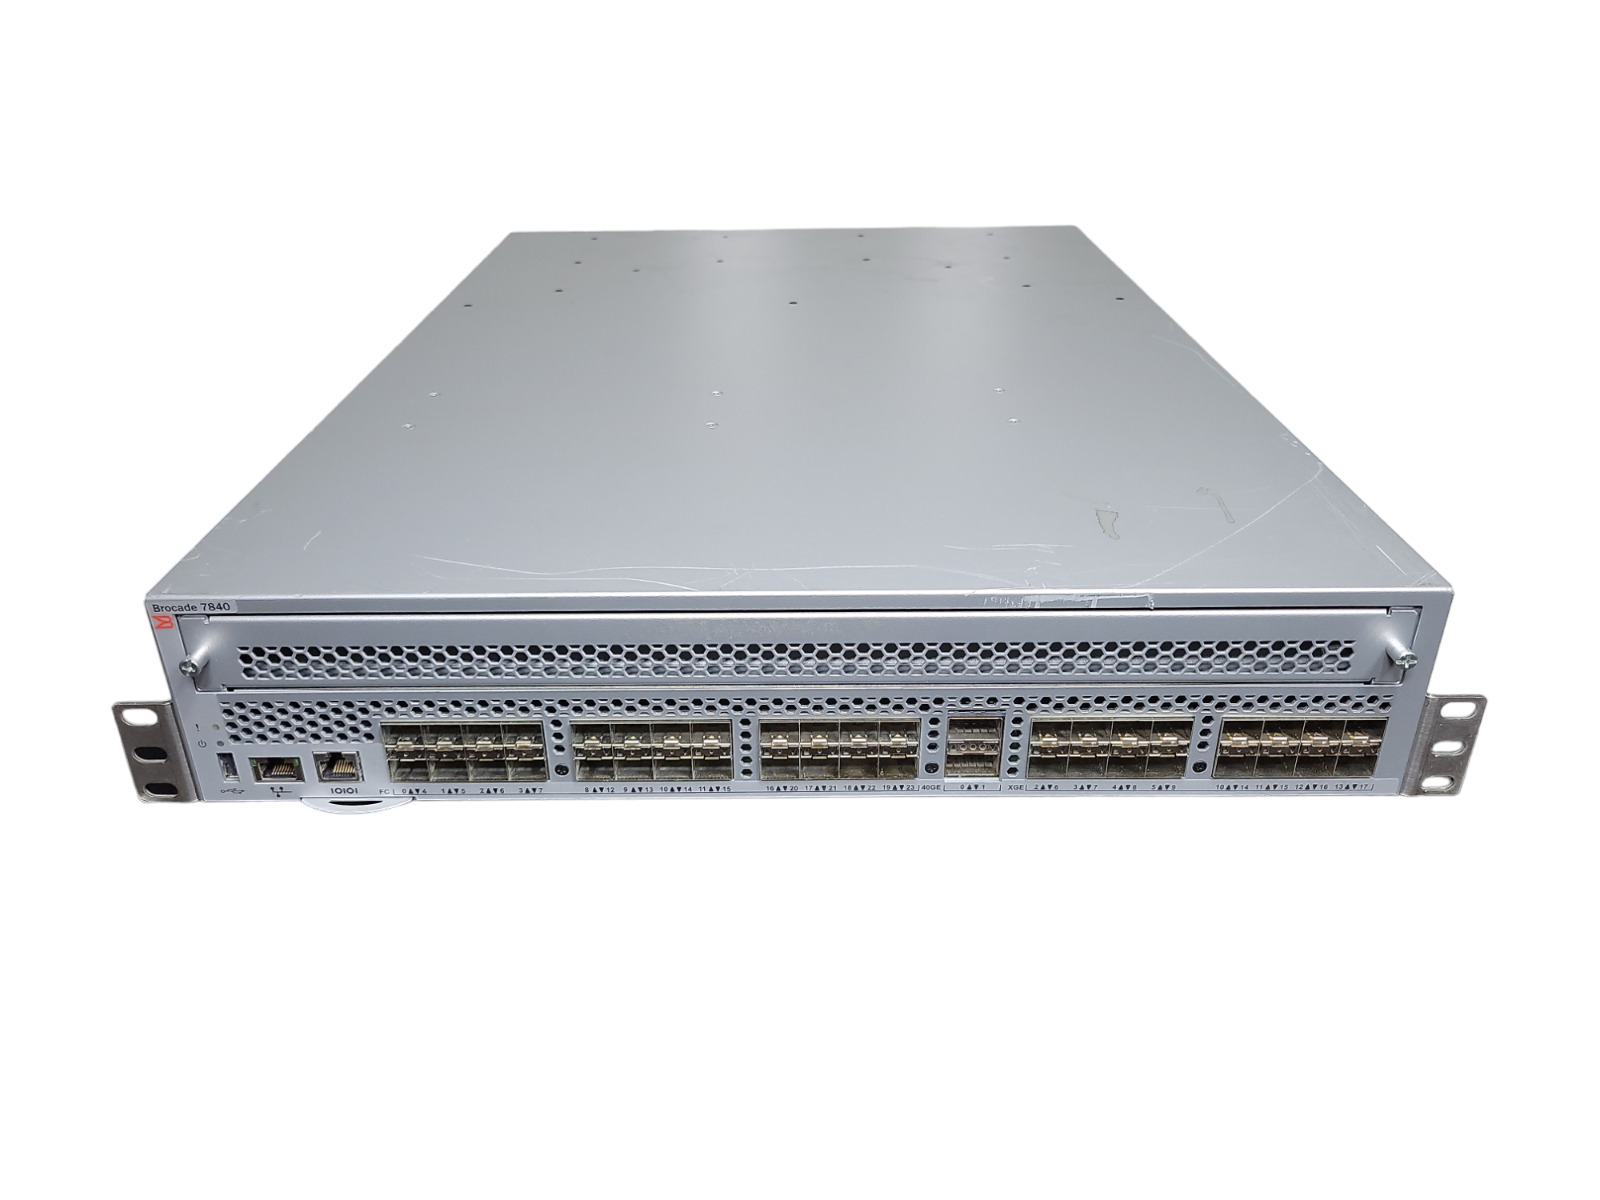 Brocade 7840 Extension Switch 24x 16Gbps Fibre Channel 16x 10GbE 2x 40GbE